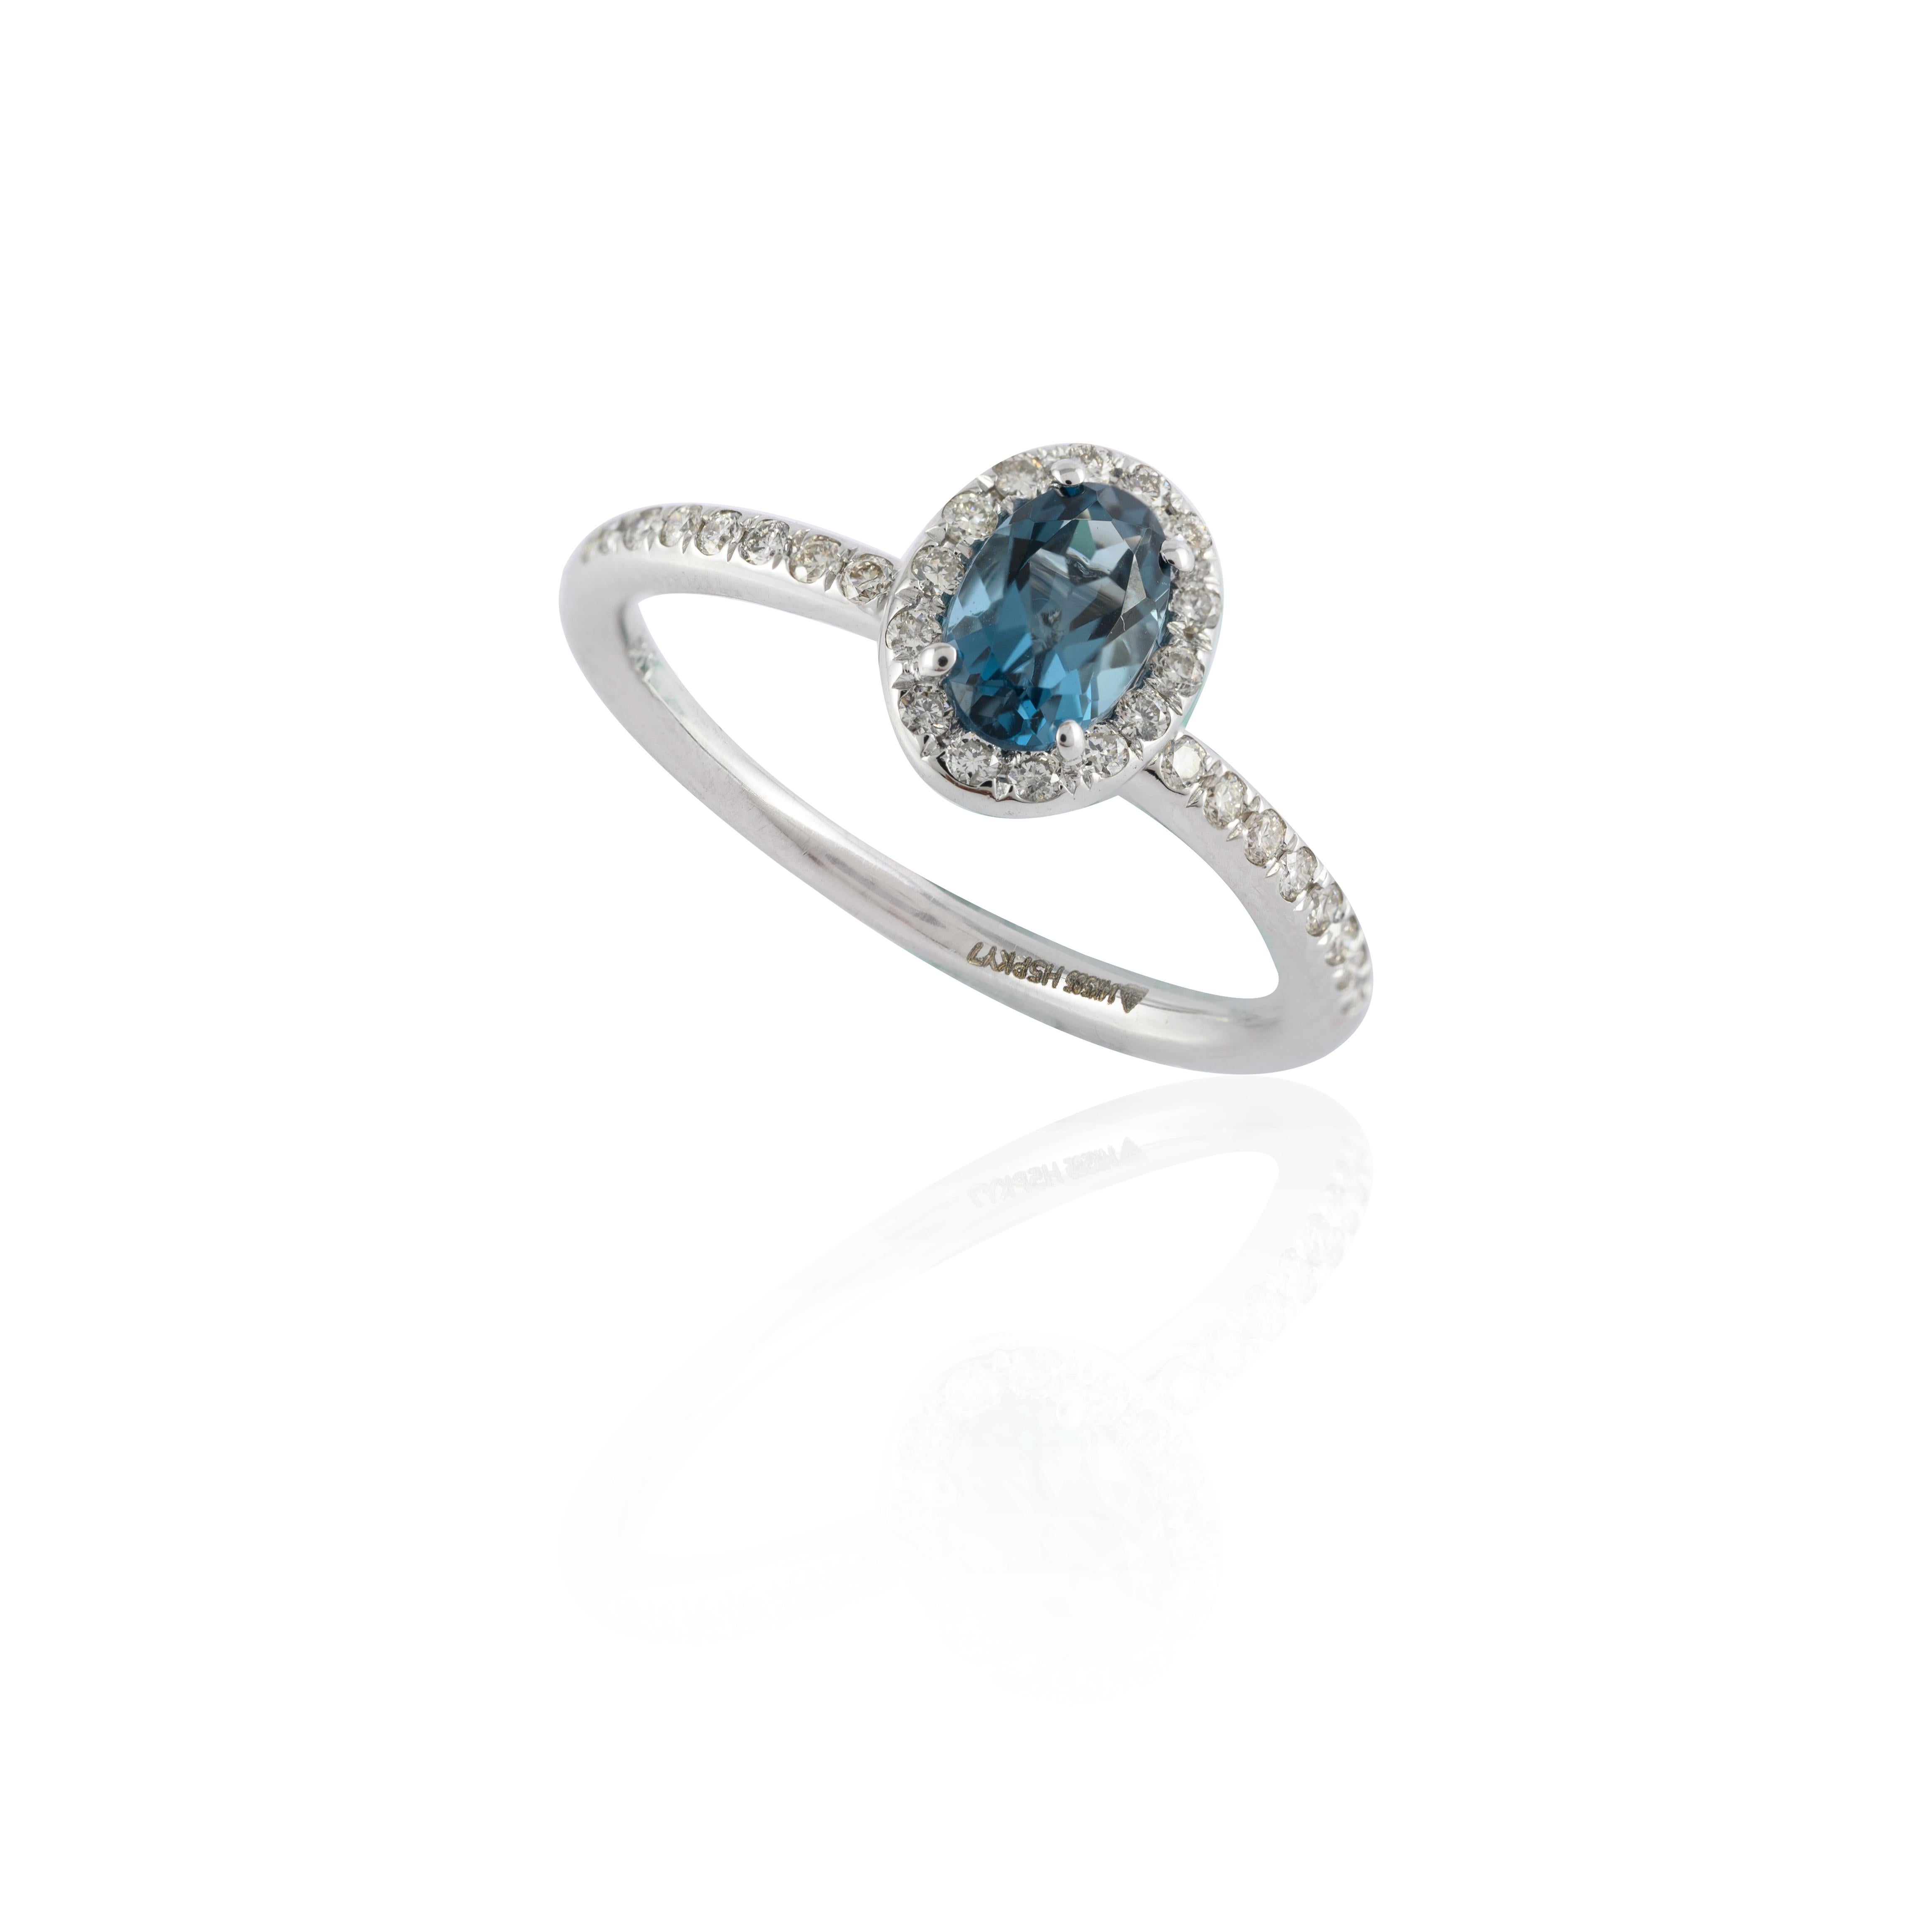 For Sale:  Natural 5.84 ct Blue Topaz and Halo Diamond Classic Ring in 14 Karat White Gold 8